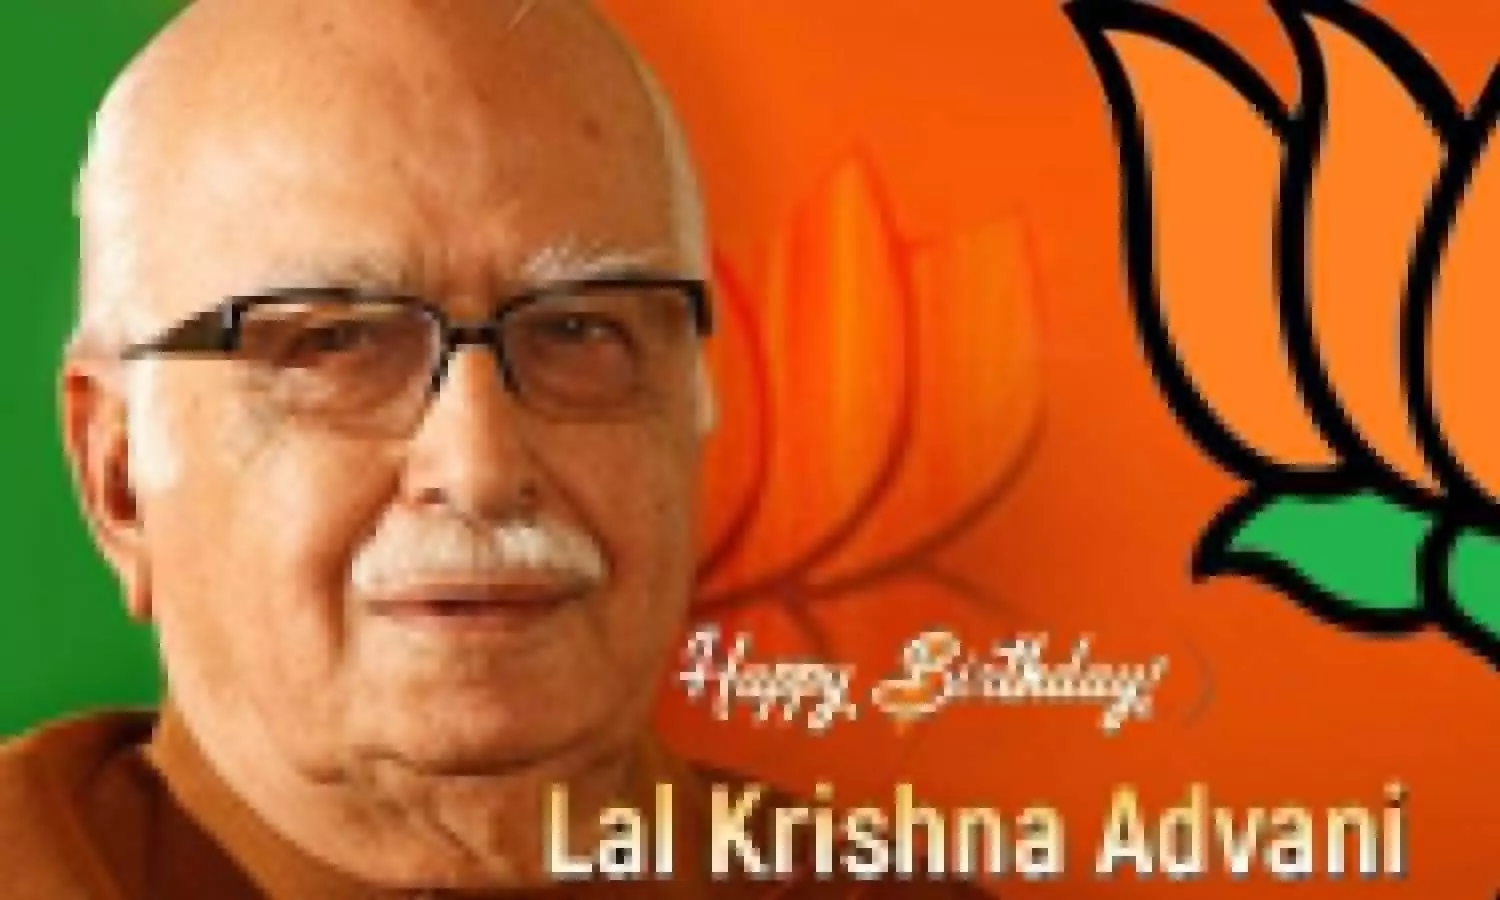 Lal Krishna Advani Birthday Lal Krishna Advani became a volunteer at the age of 14, strengthened the BJP